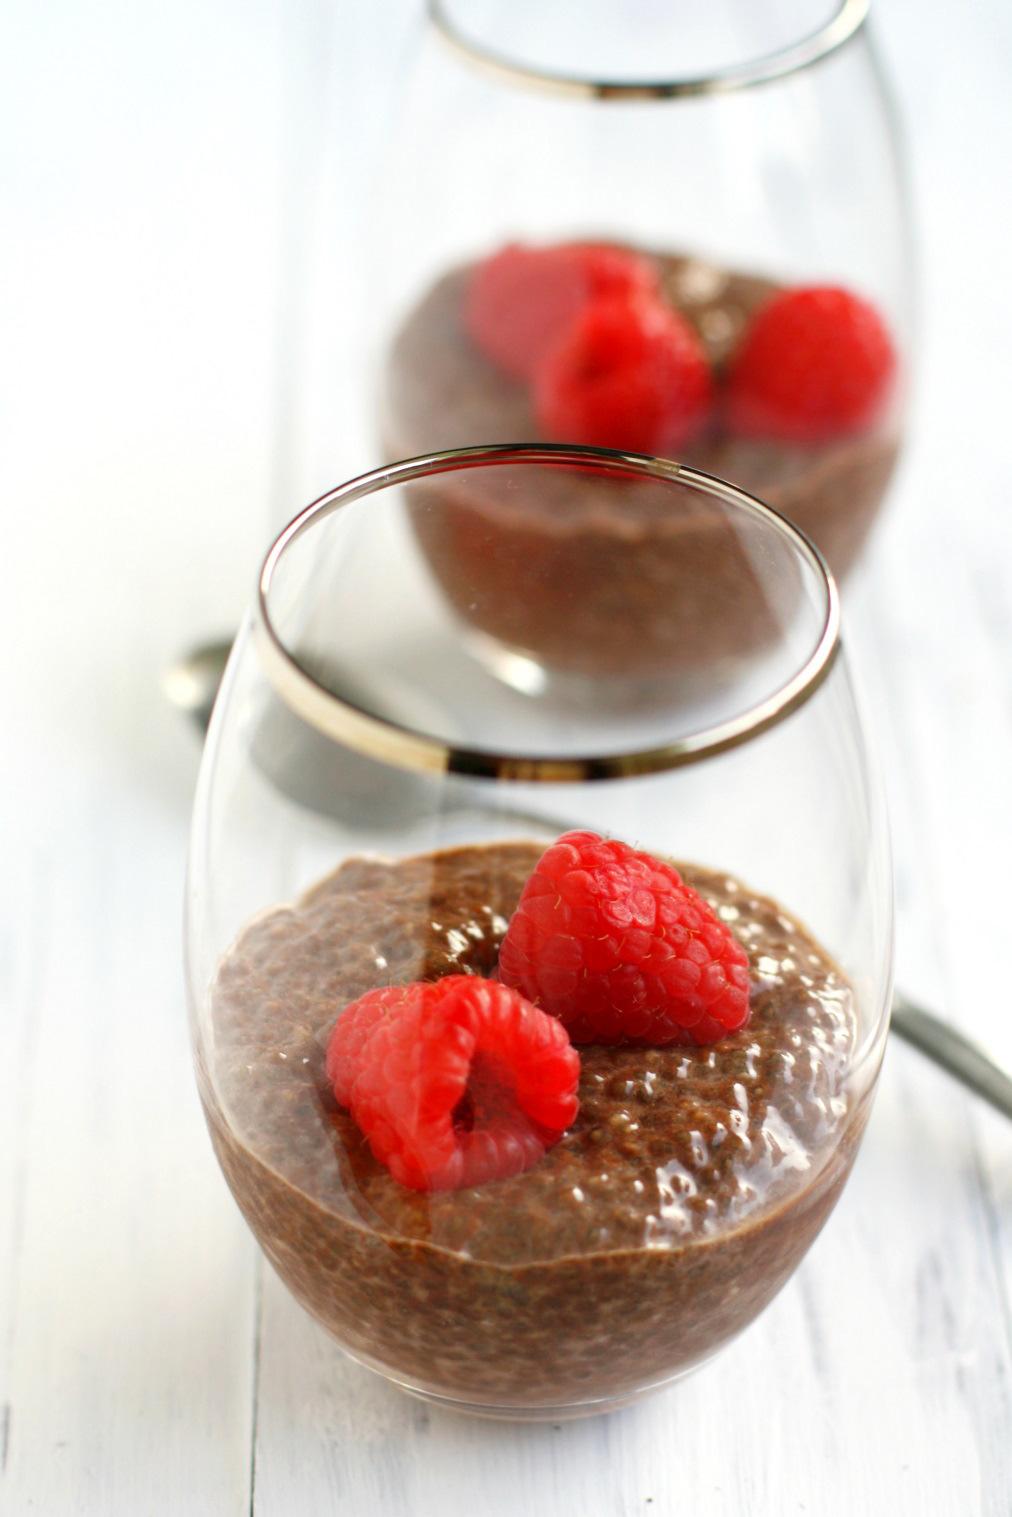 Chocolate Chia Seed Pudding 4 Tablespoons chia seeds 2 Tablespoons unsweetened cocoa powder 2 Tablespoons maple syrup ½ teaspoon vanilla extract 1 cup non-dairy milk (coconut milk works well) Pinch